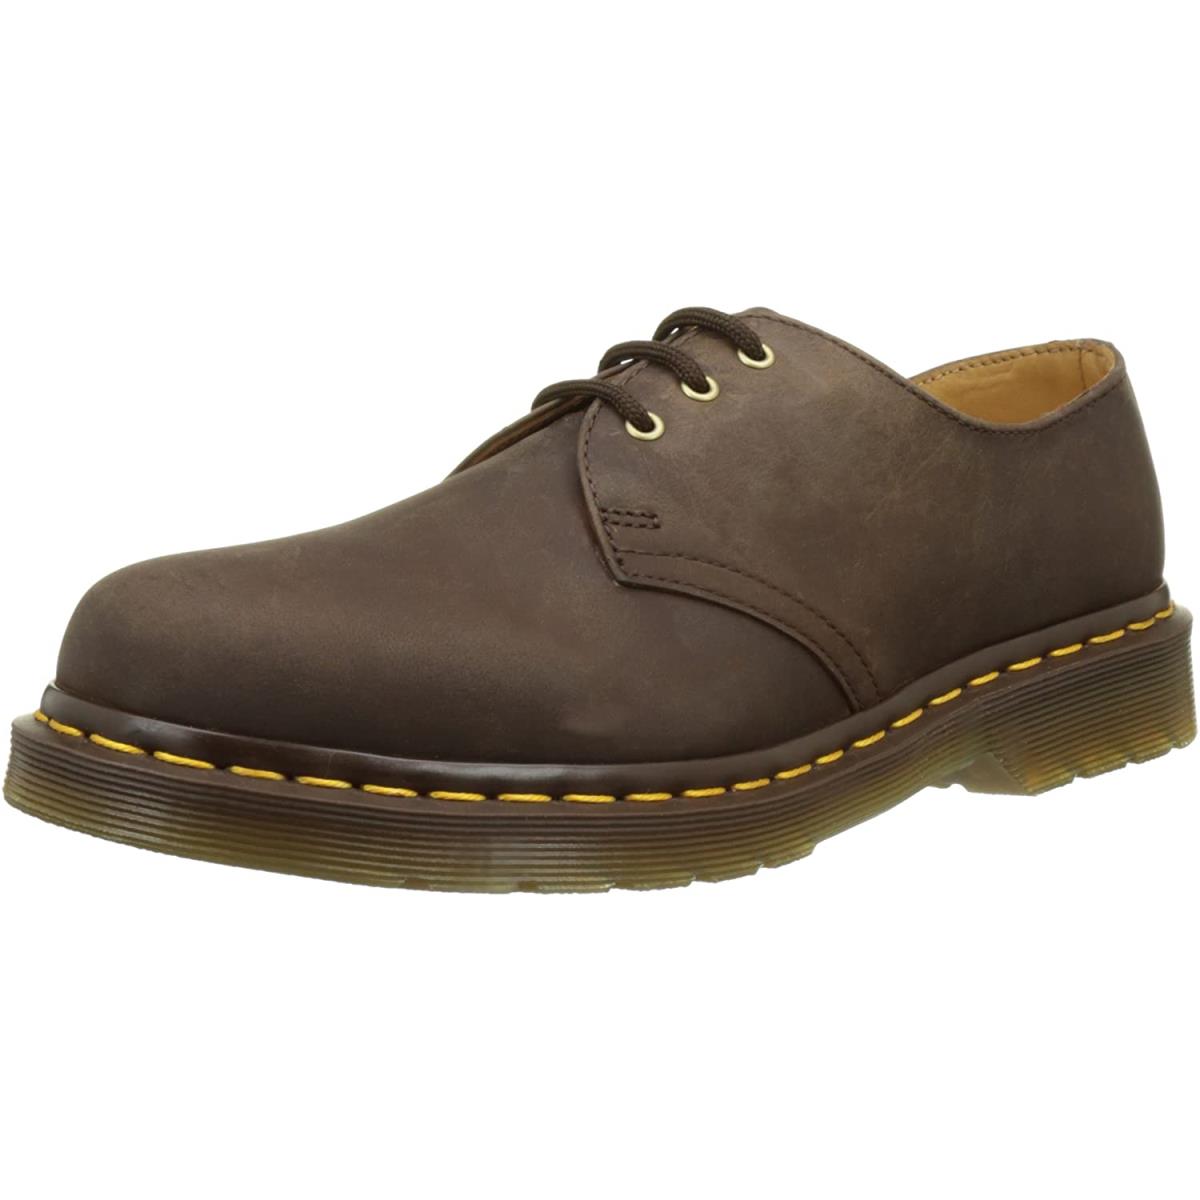 Dr. Martens 1461 3-Eye Leather Oxford Shoe For Men and Women Gaucho Crazy Horse